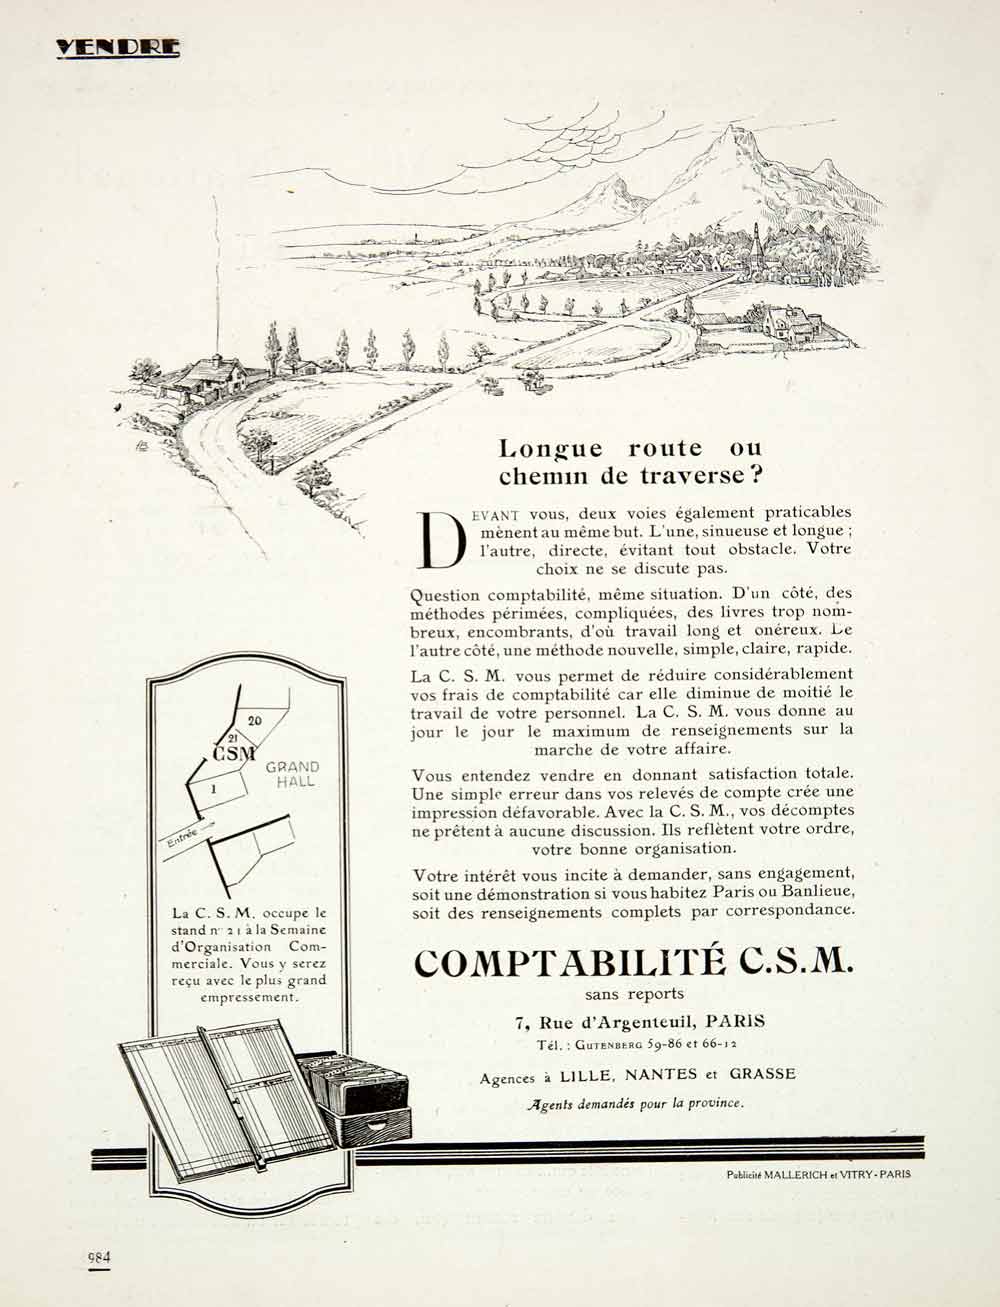 1924 Ad Comptabilite CSM Accounting Agency French 7 Rue D'Argenteuil Paris VEN3